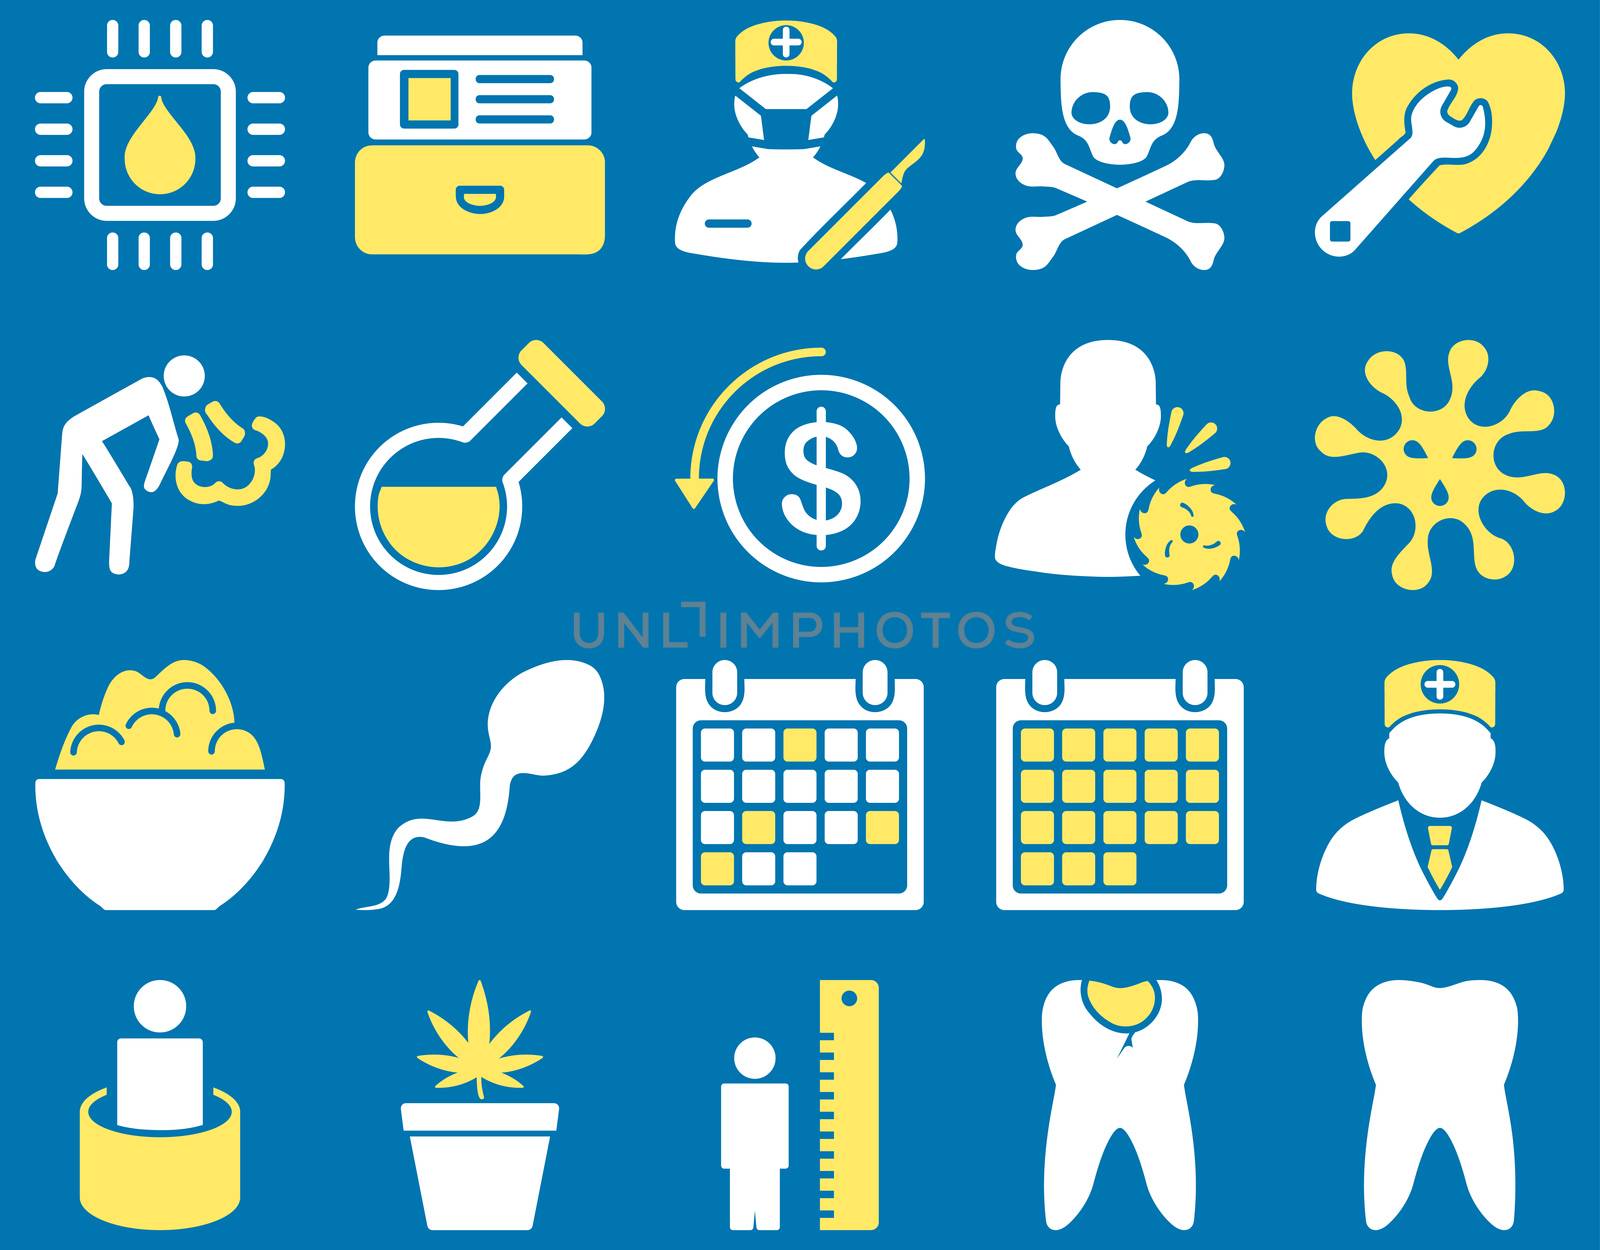 Medical icon set. Style: bicolor icons drawn with yellow and white colors on a blue background.